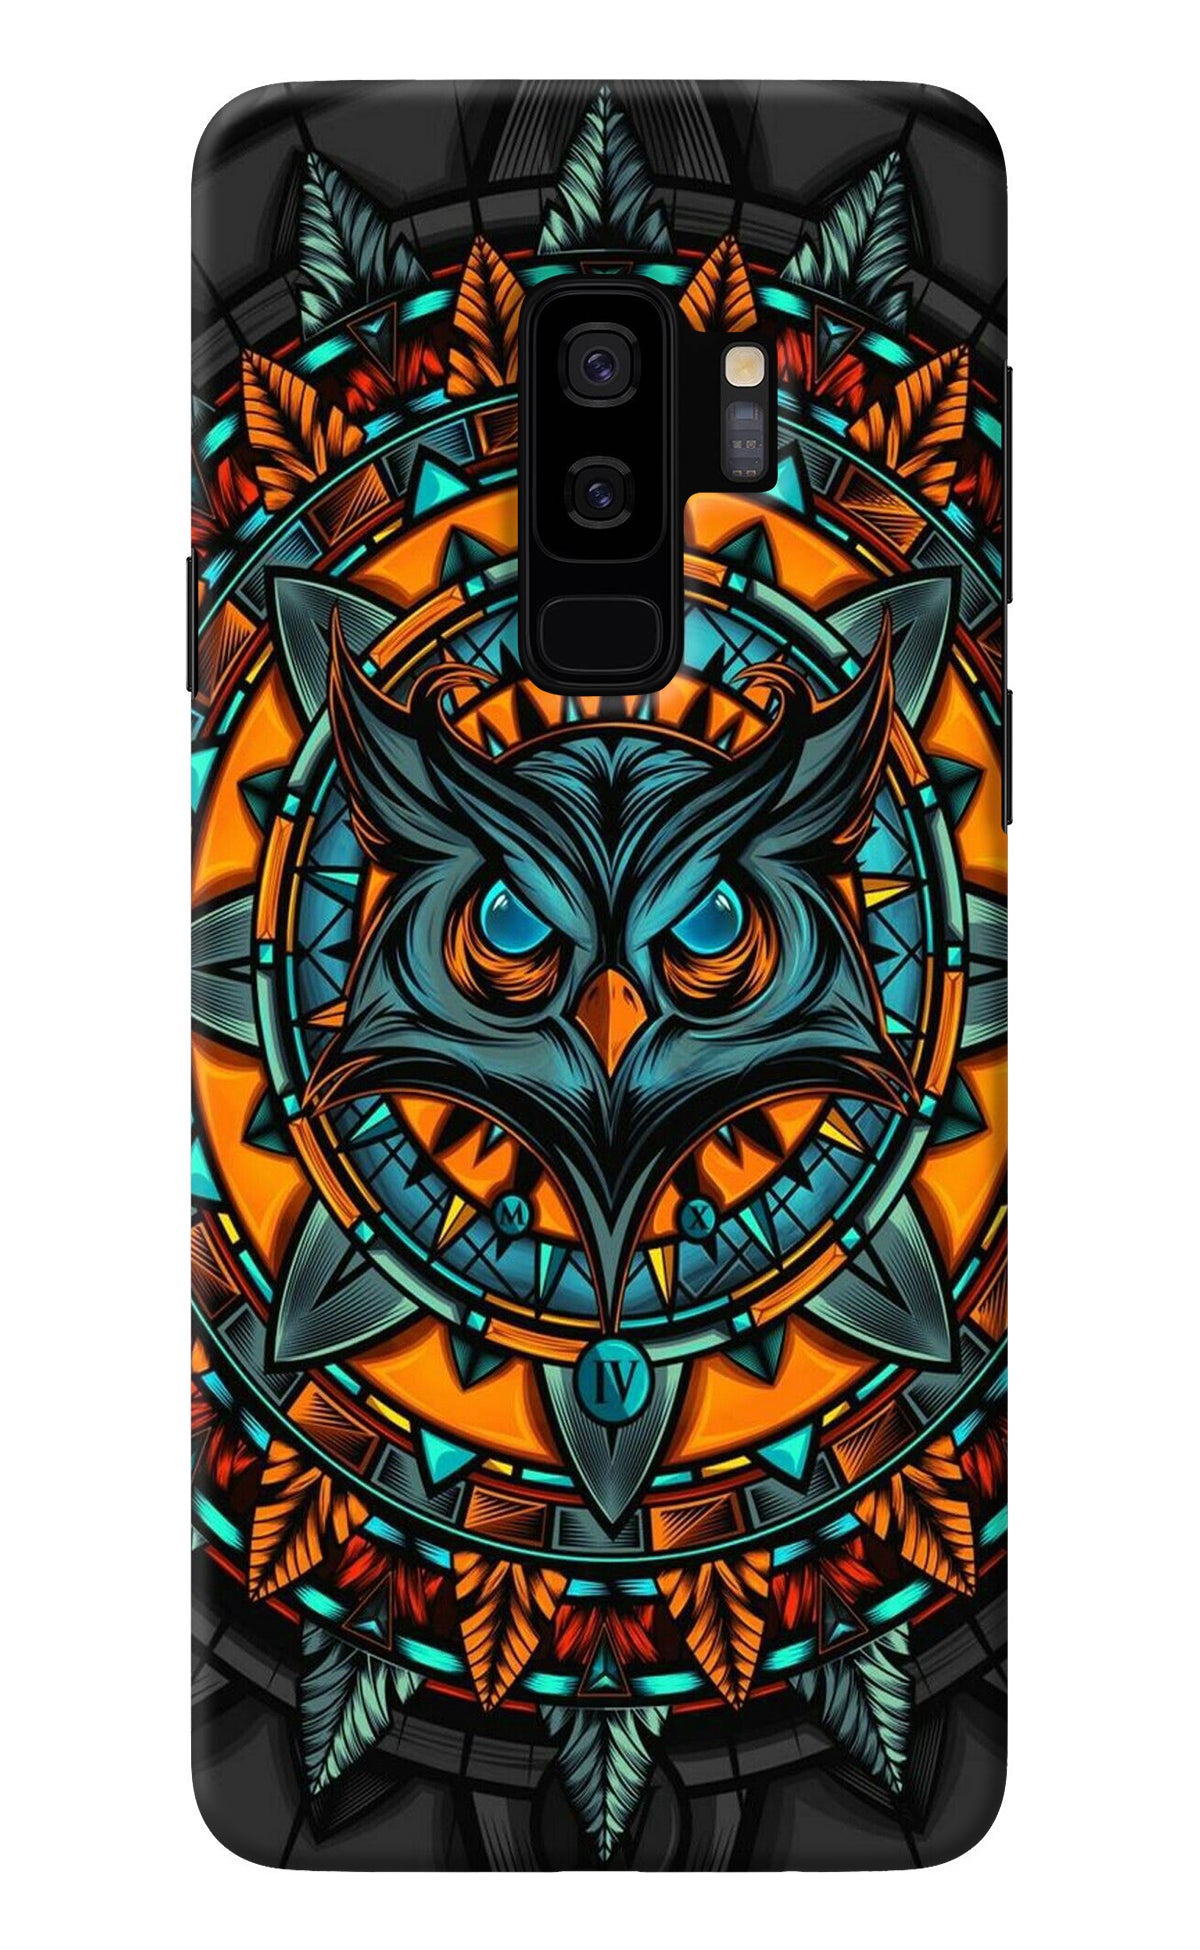 Angry Owl Art Samsung S9 Plus Back Cover